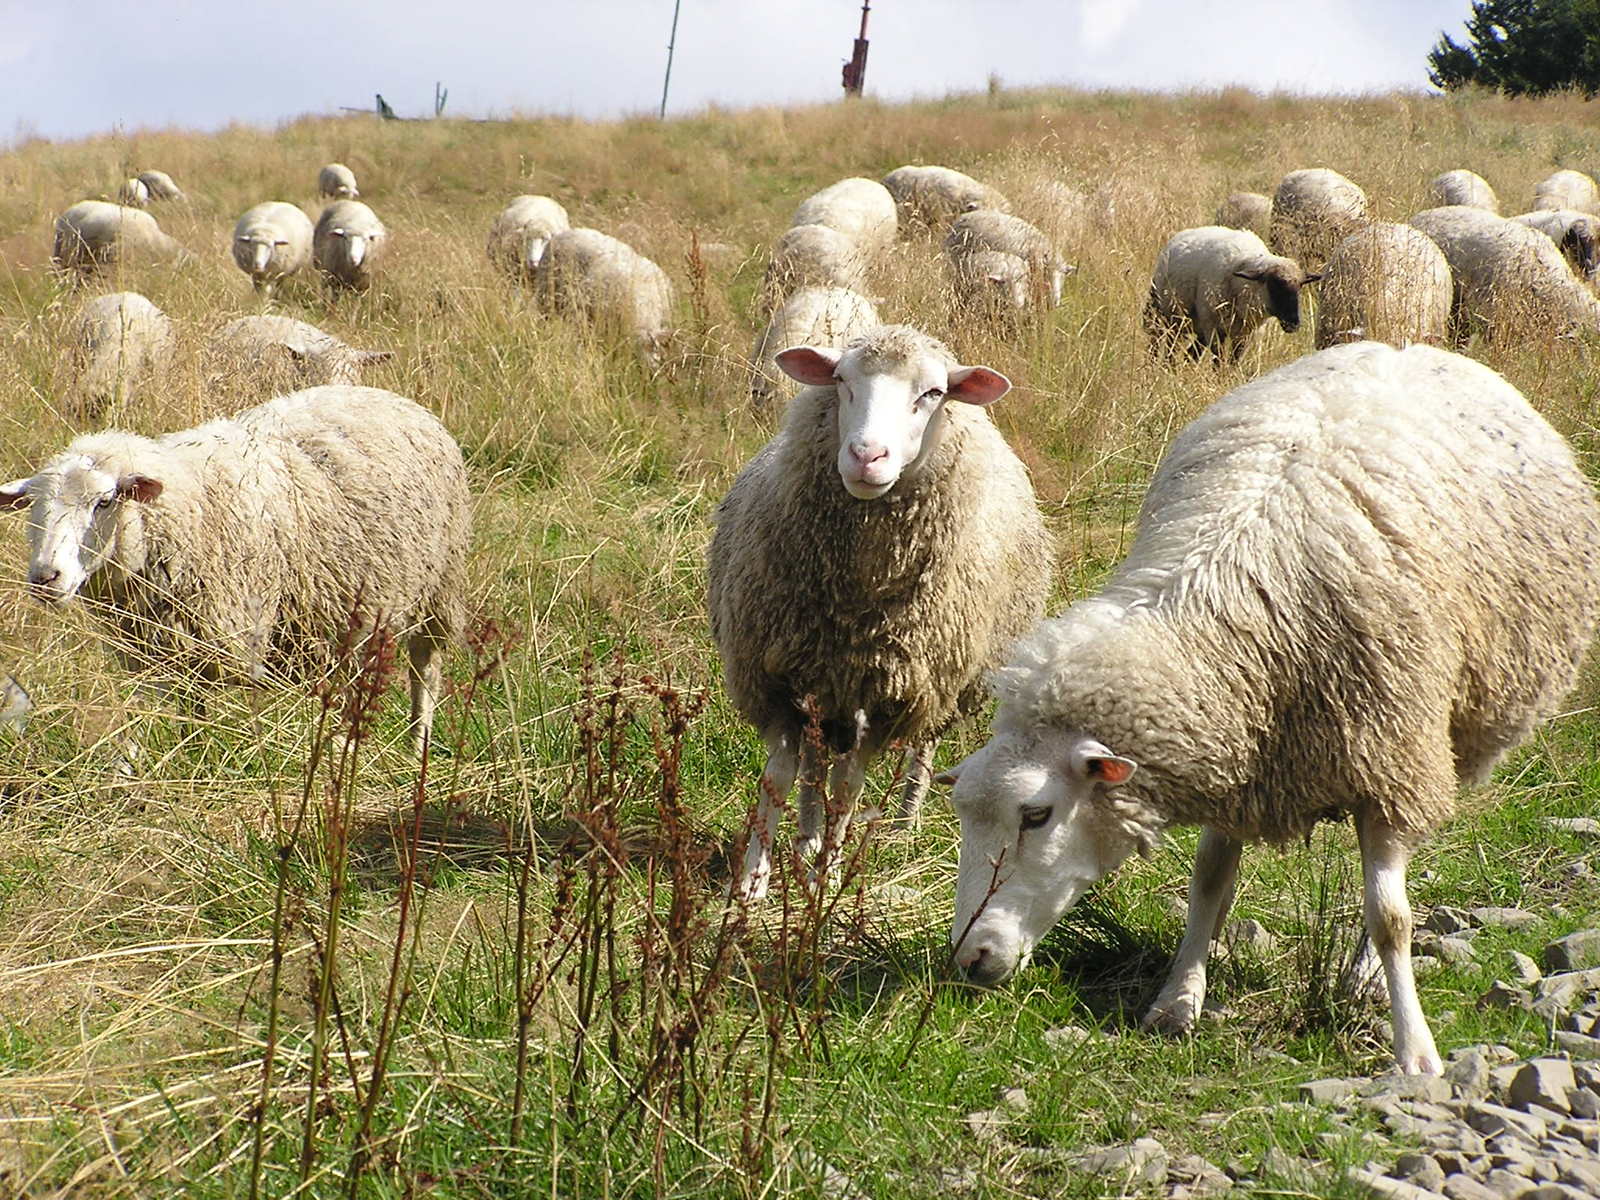 a small flock of sheep grazing in the grassy field